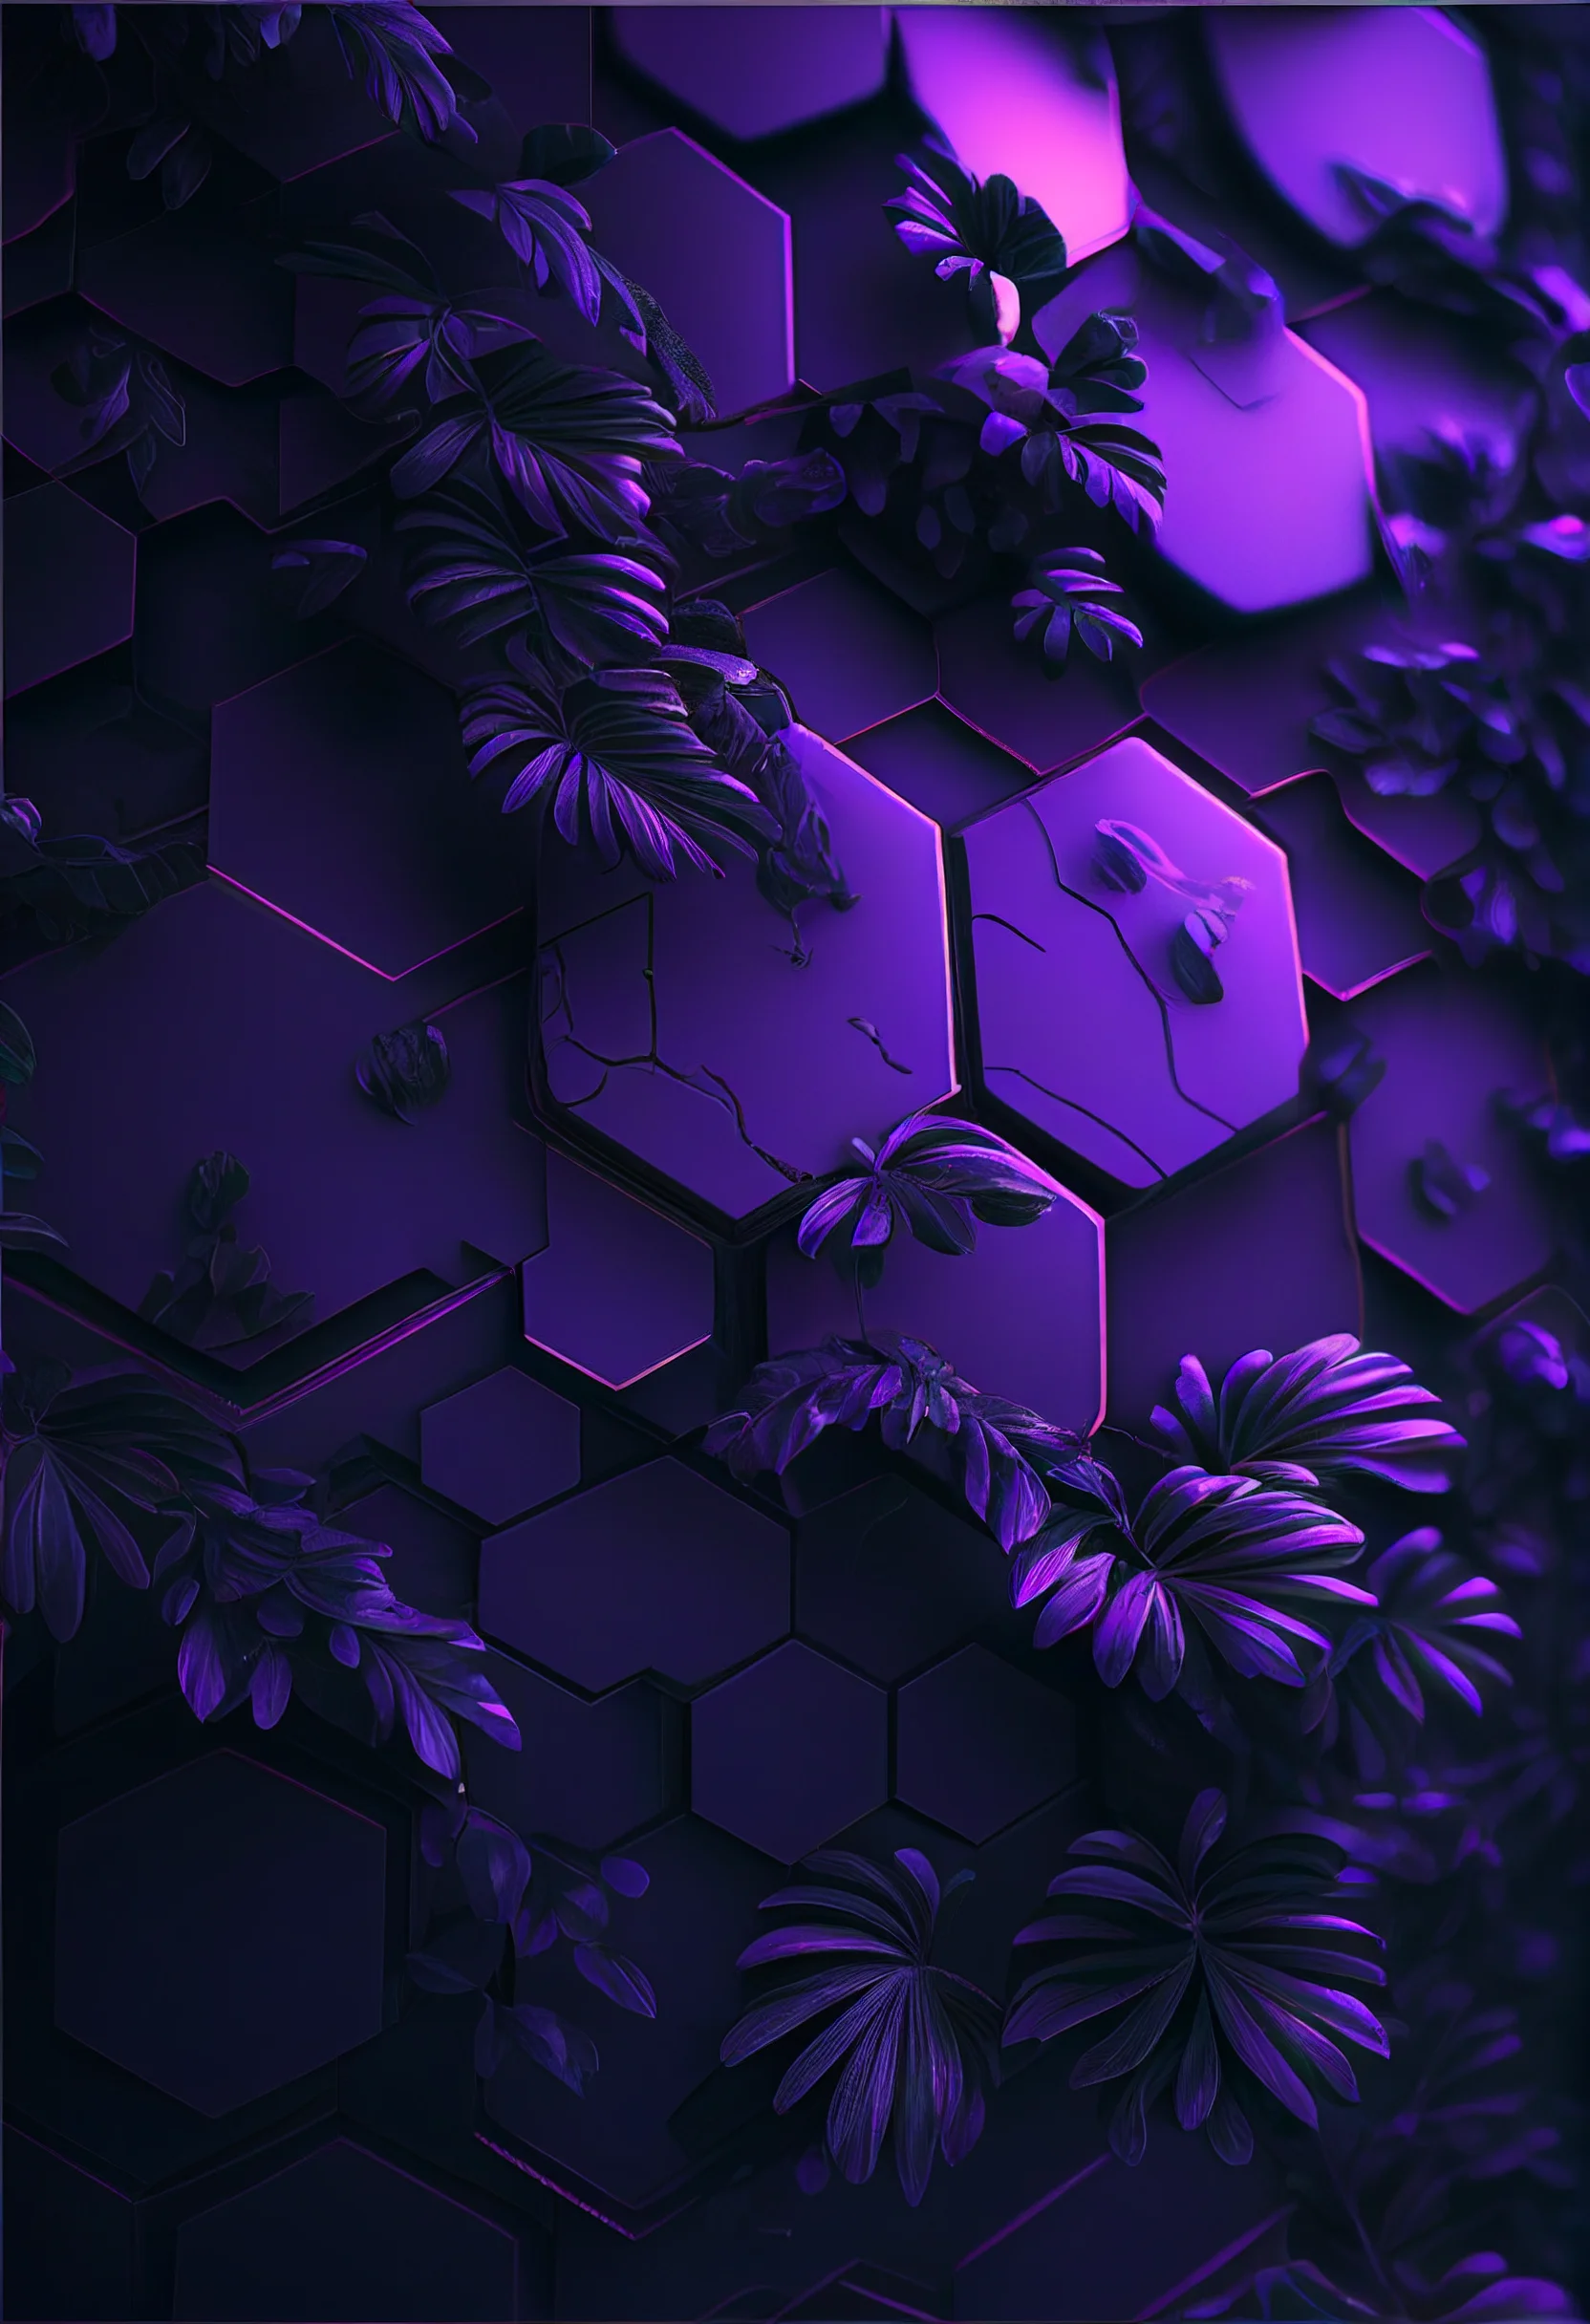 Top 20 Inspirational Purple Aesthetic iPhone Wallpapers for Free 2023